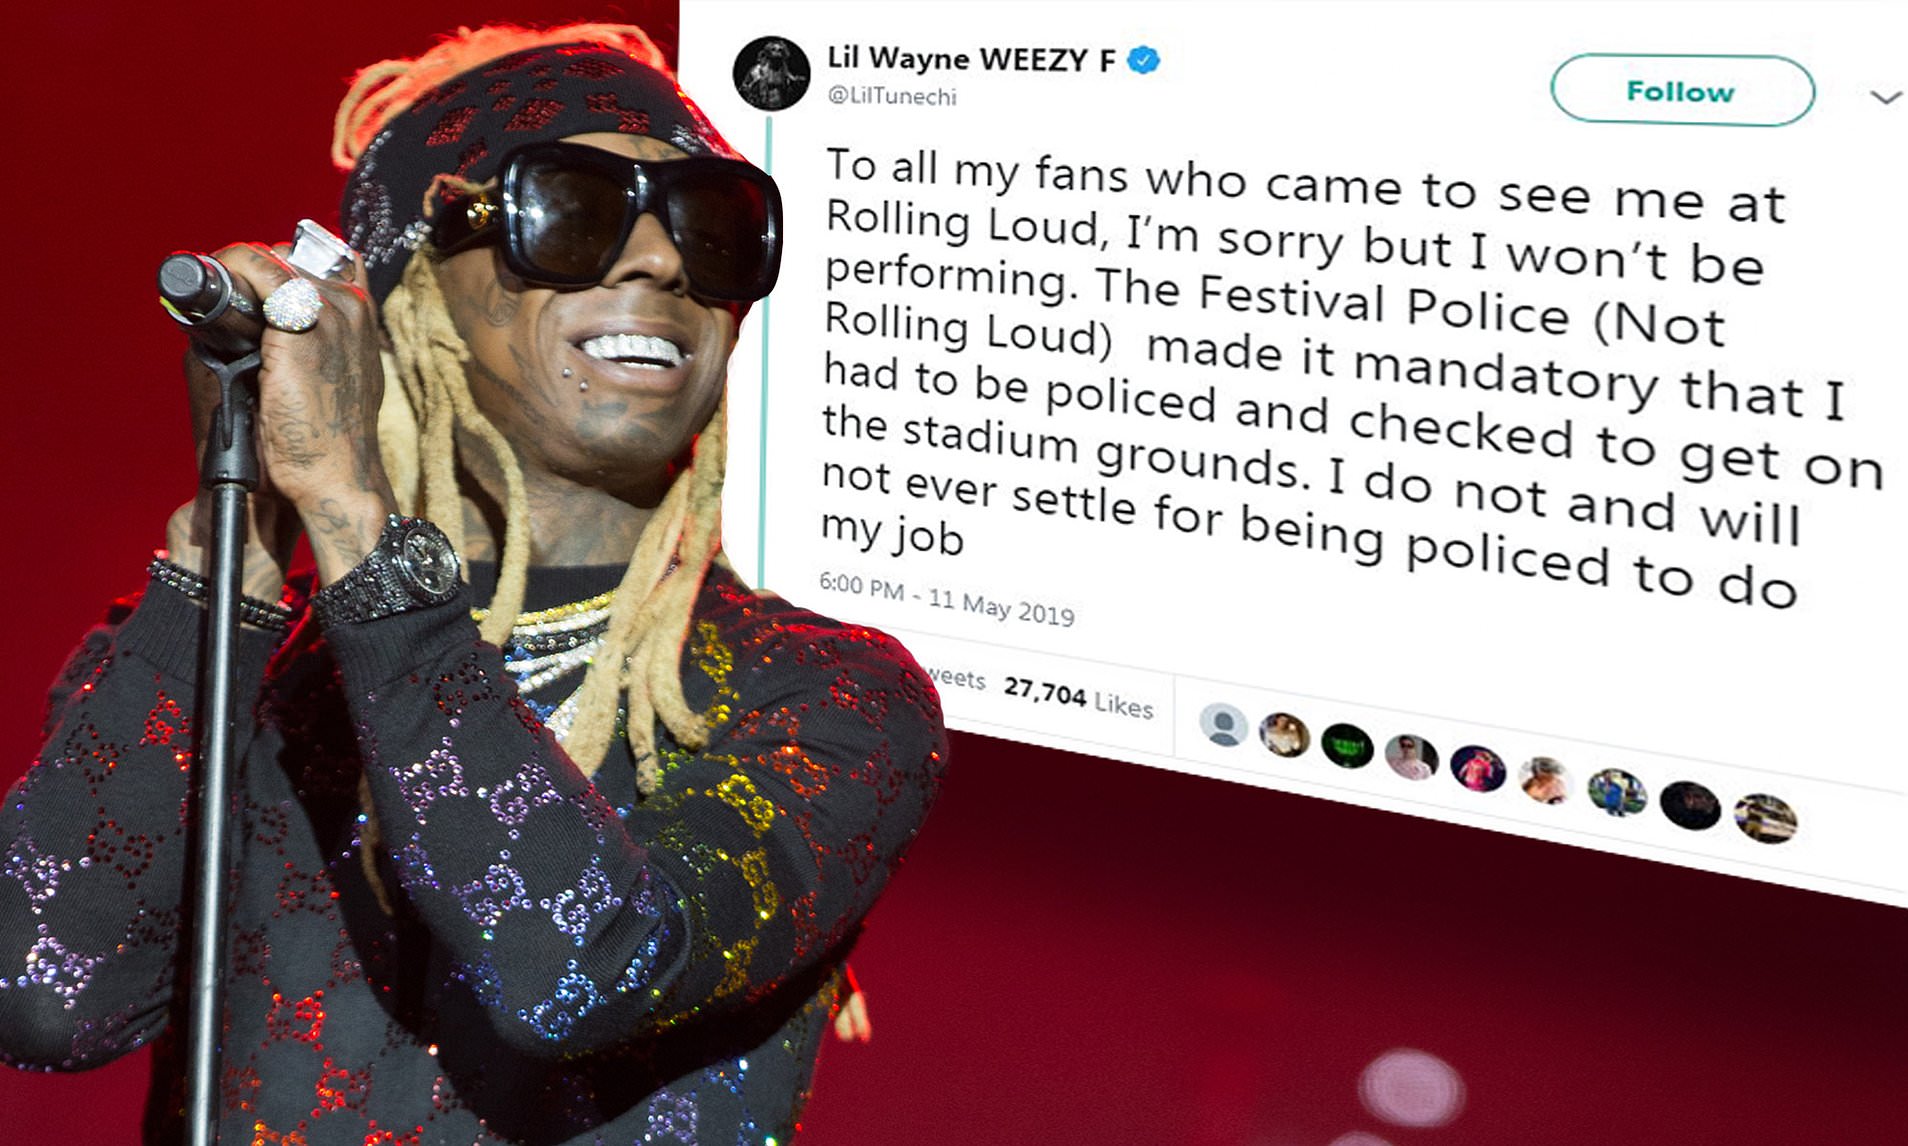 Security Stops Lil Wayne For A 'Mandatory' Search And He Abruptly Cancels His Rolling Loud Performance